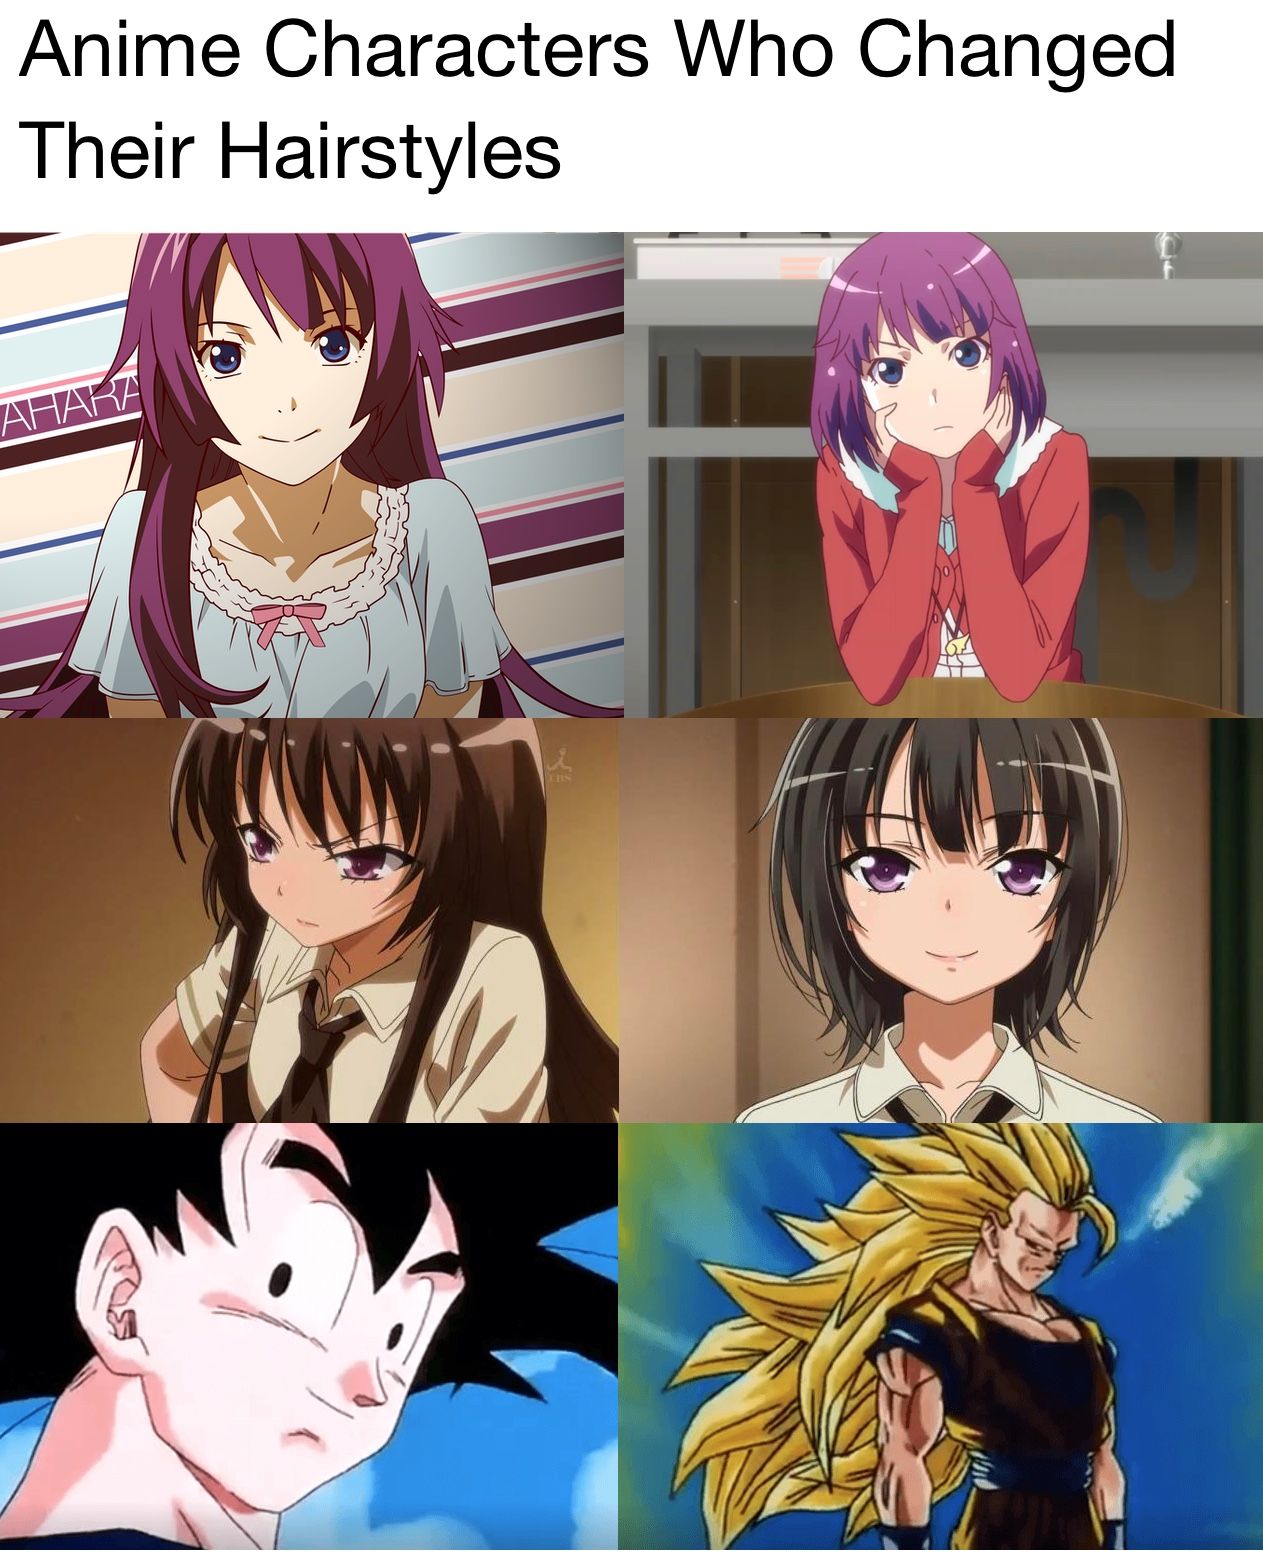 The 17 Cutest Anime Girls Ranked And Why Theyre So Lovable  whatNerd